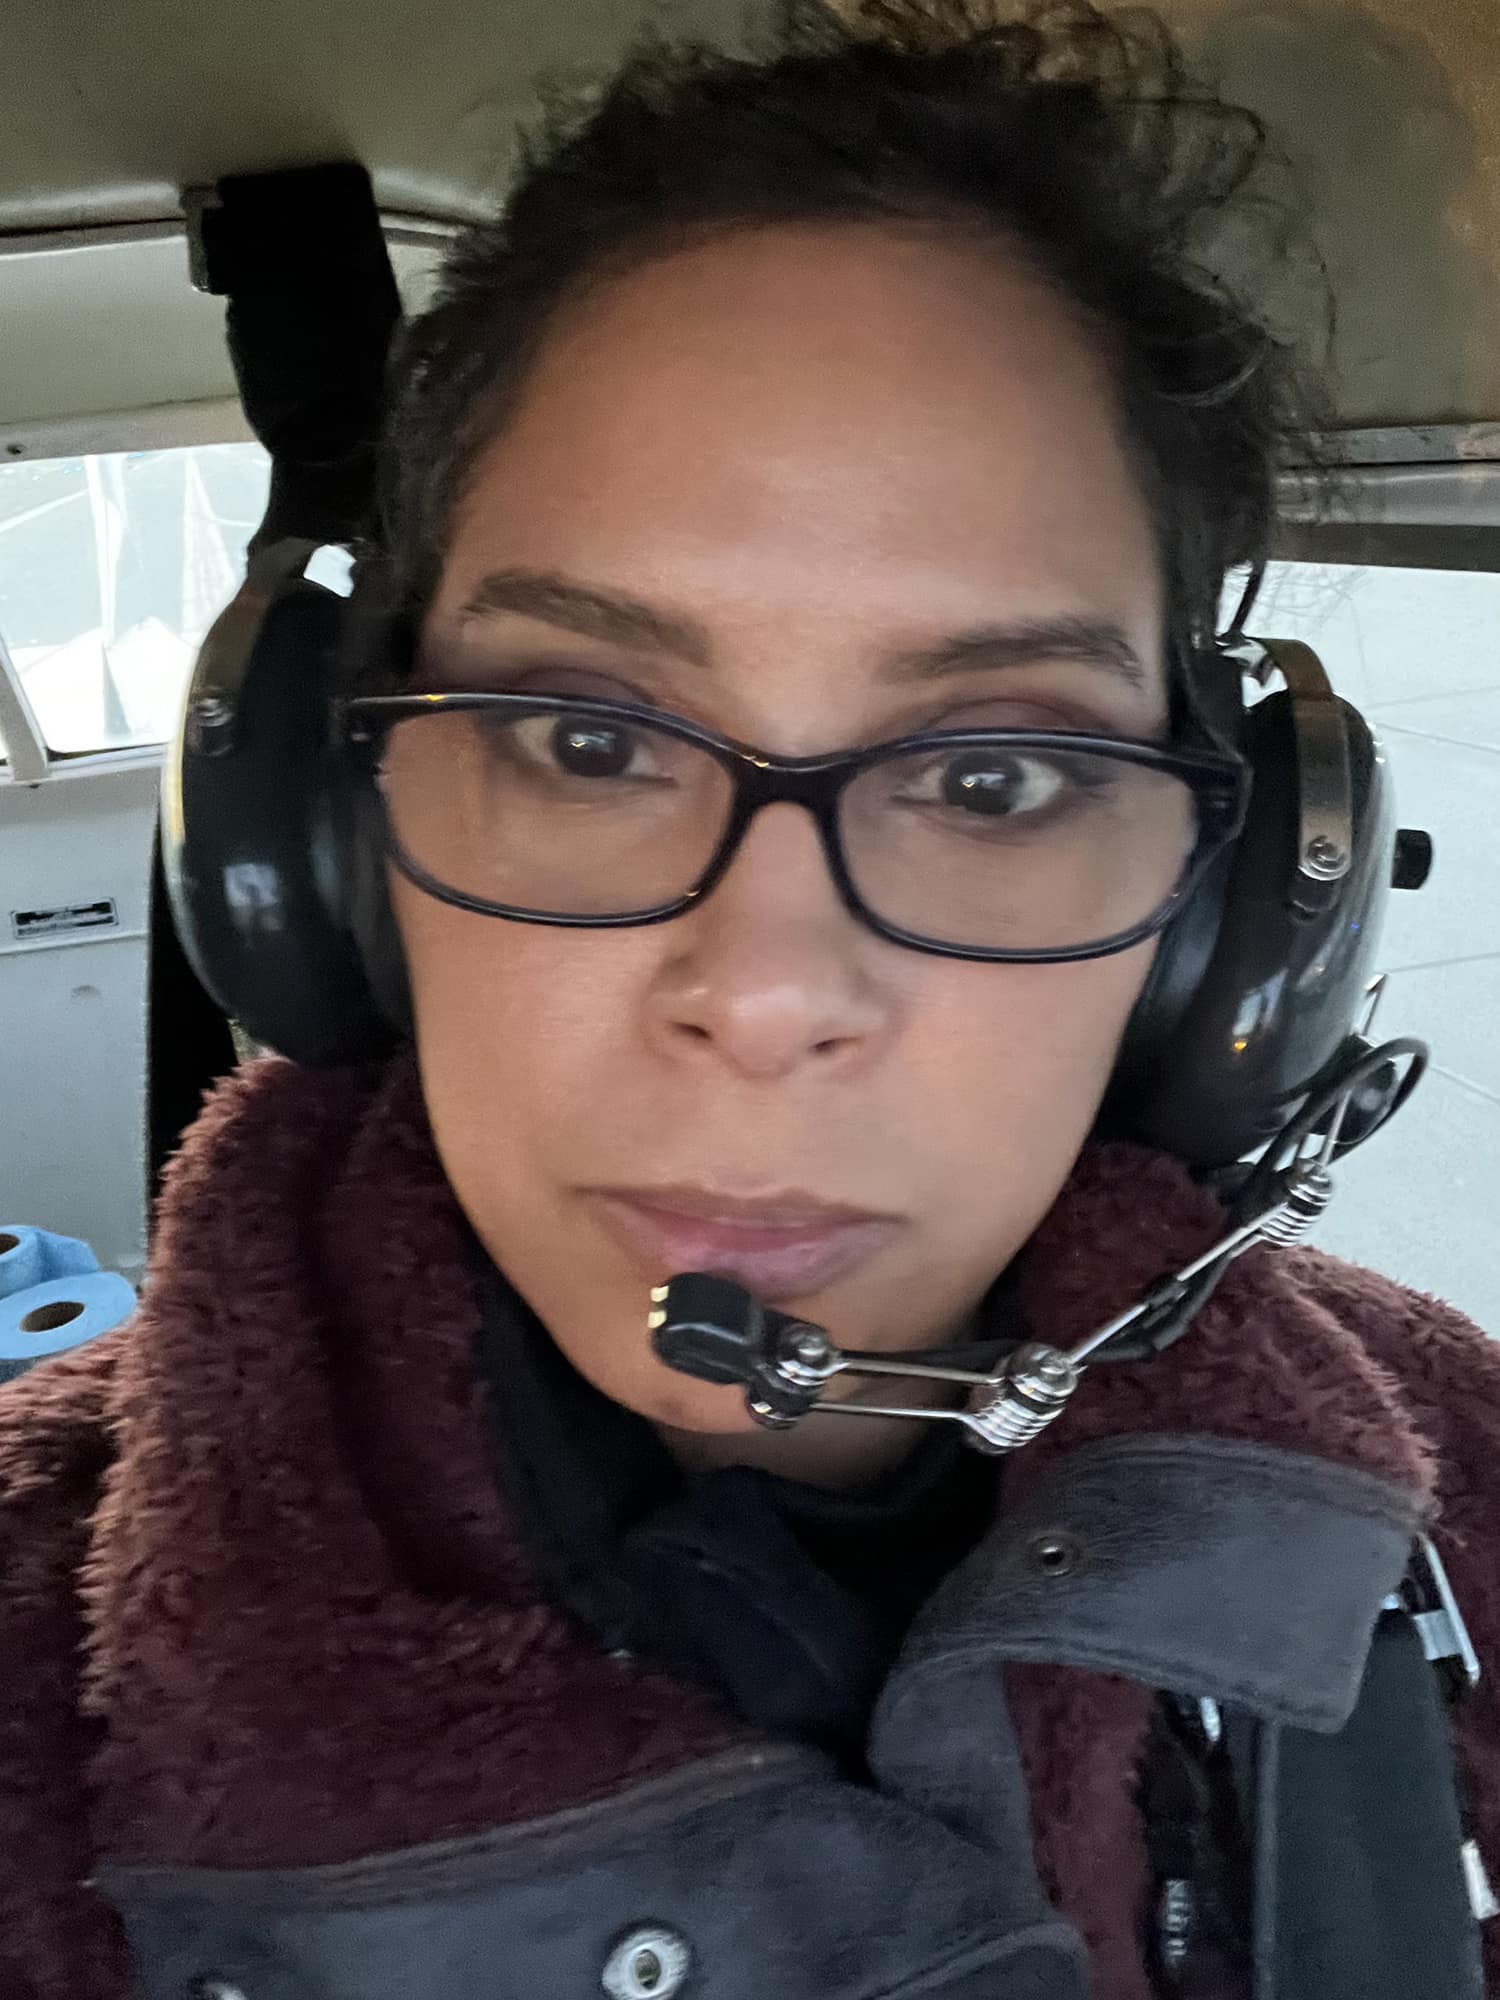 Closeup of Evelyn in the cockpit of a small plane wearing a pilot headset and a coat with a cowl collar.